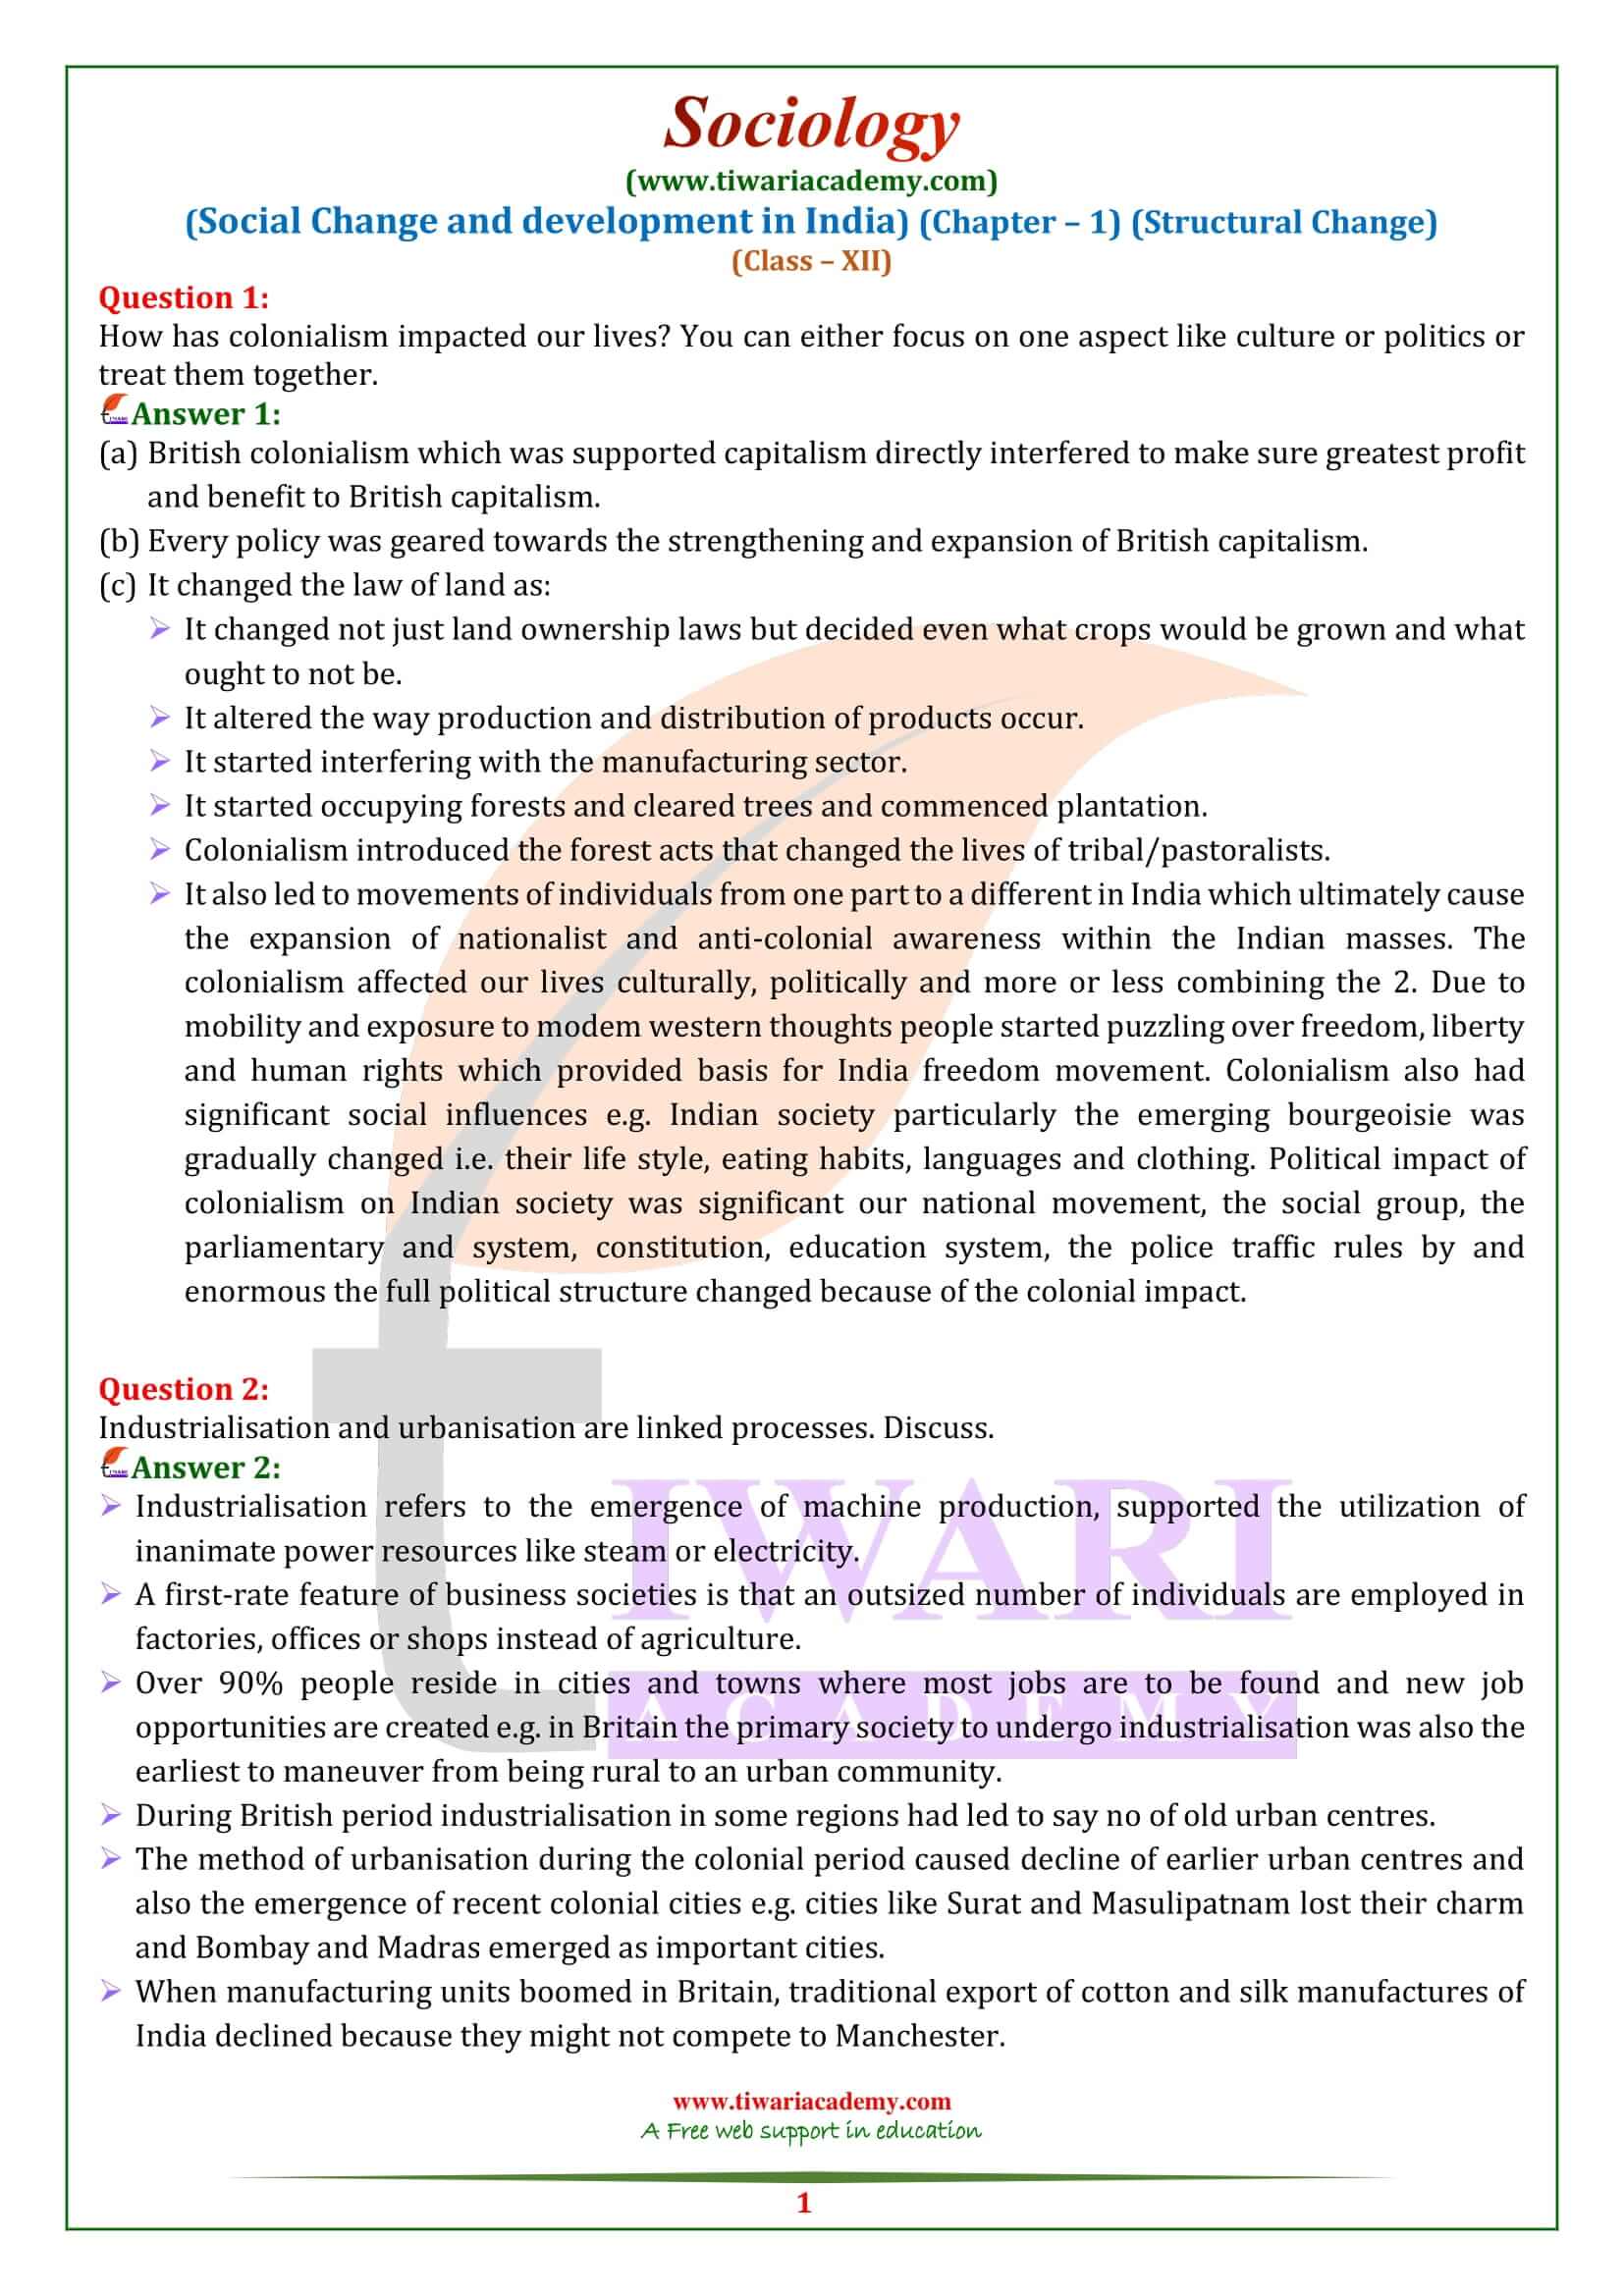 NCERT Solutions for Class 12 Sociology Chapter 1